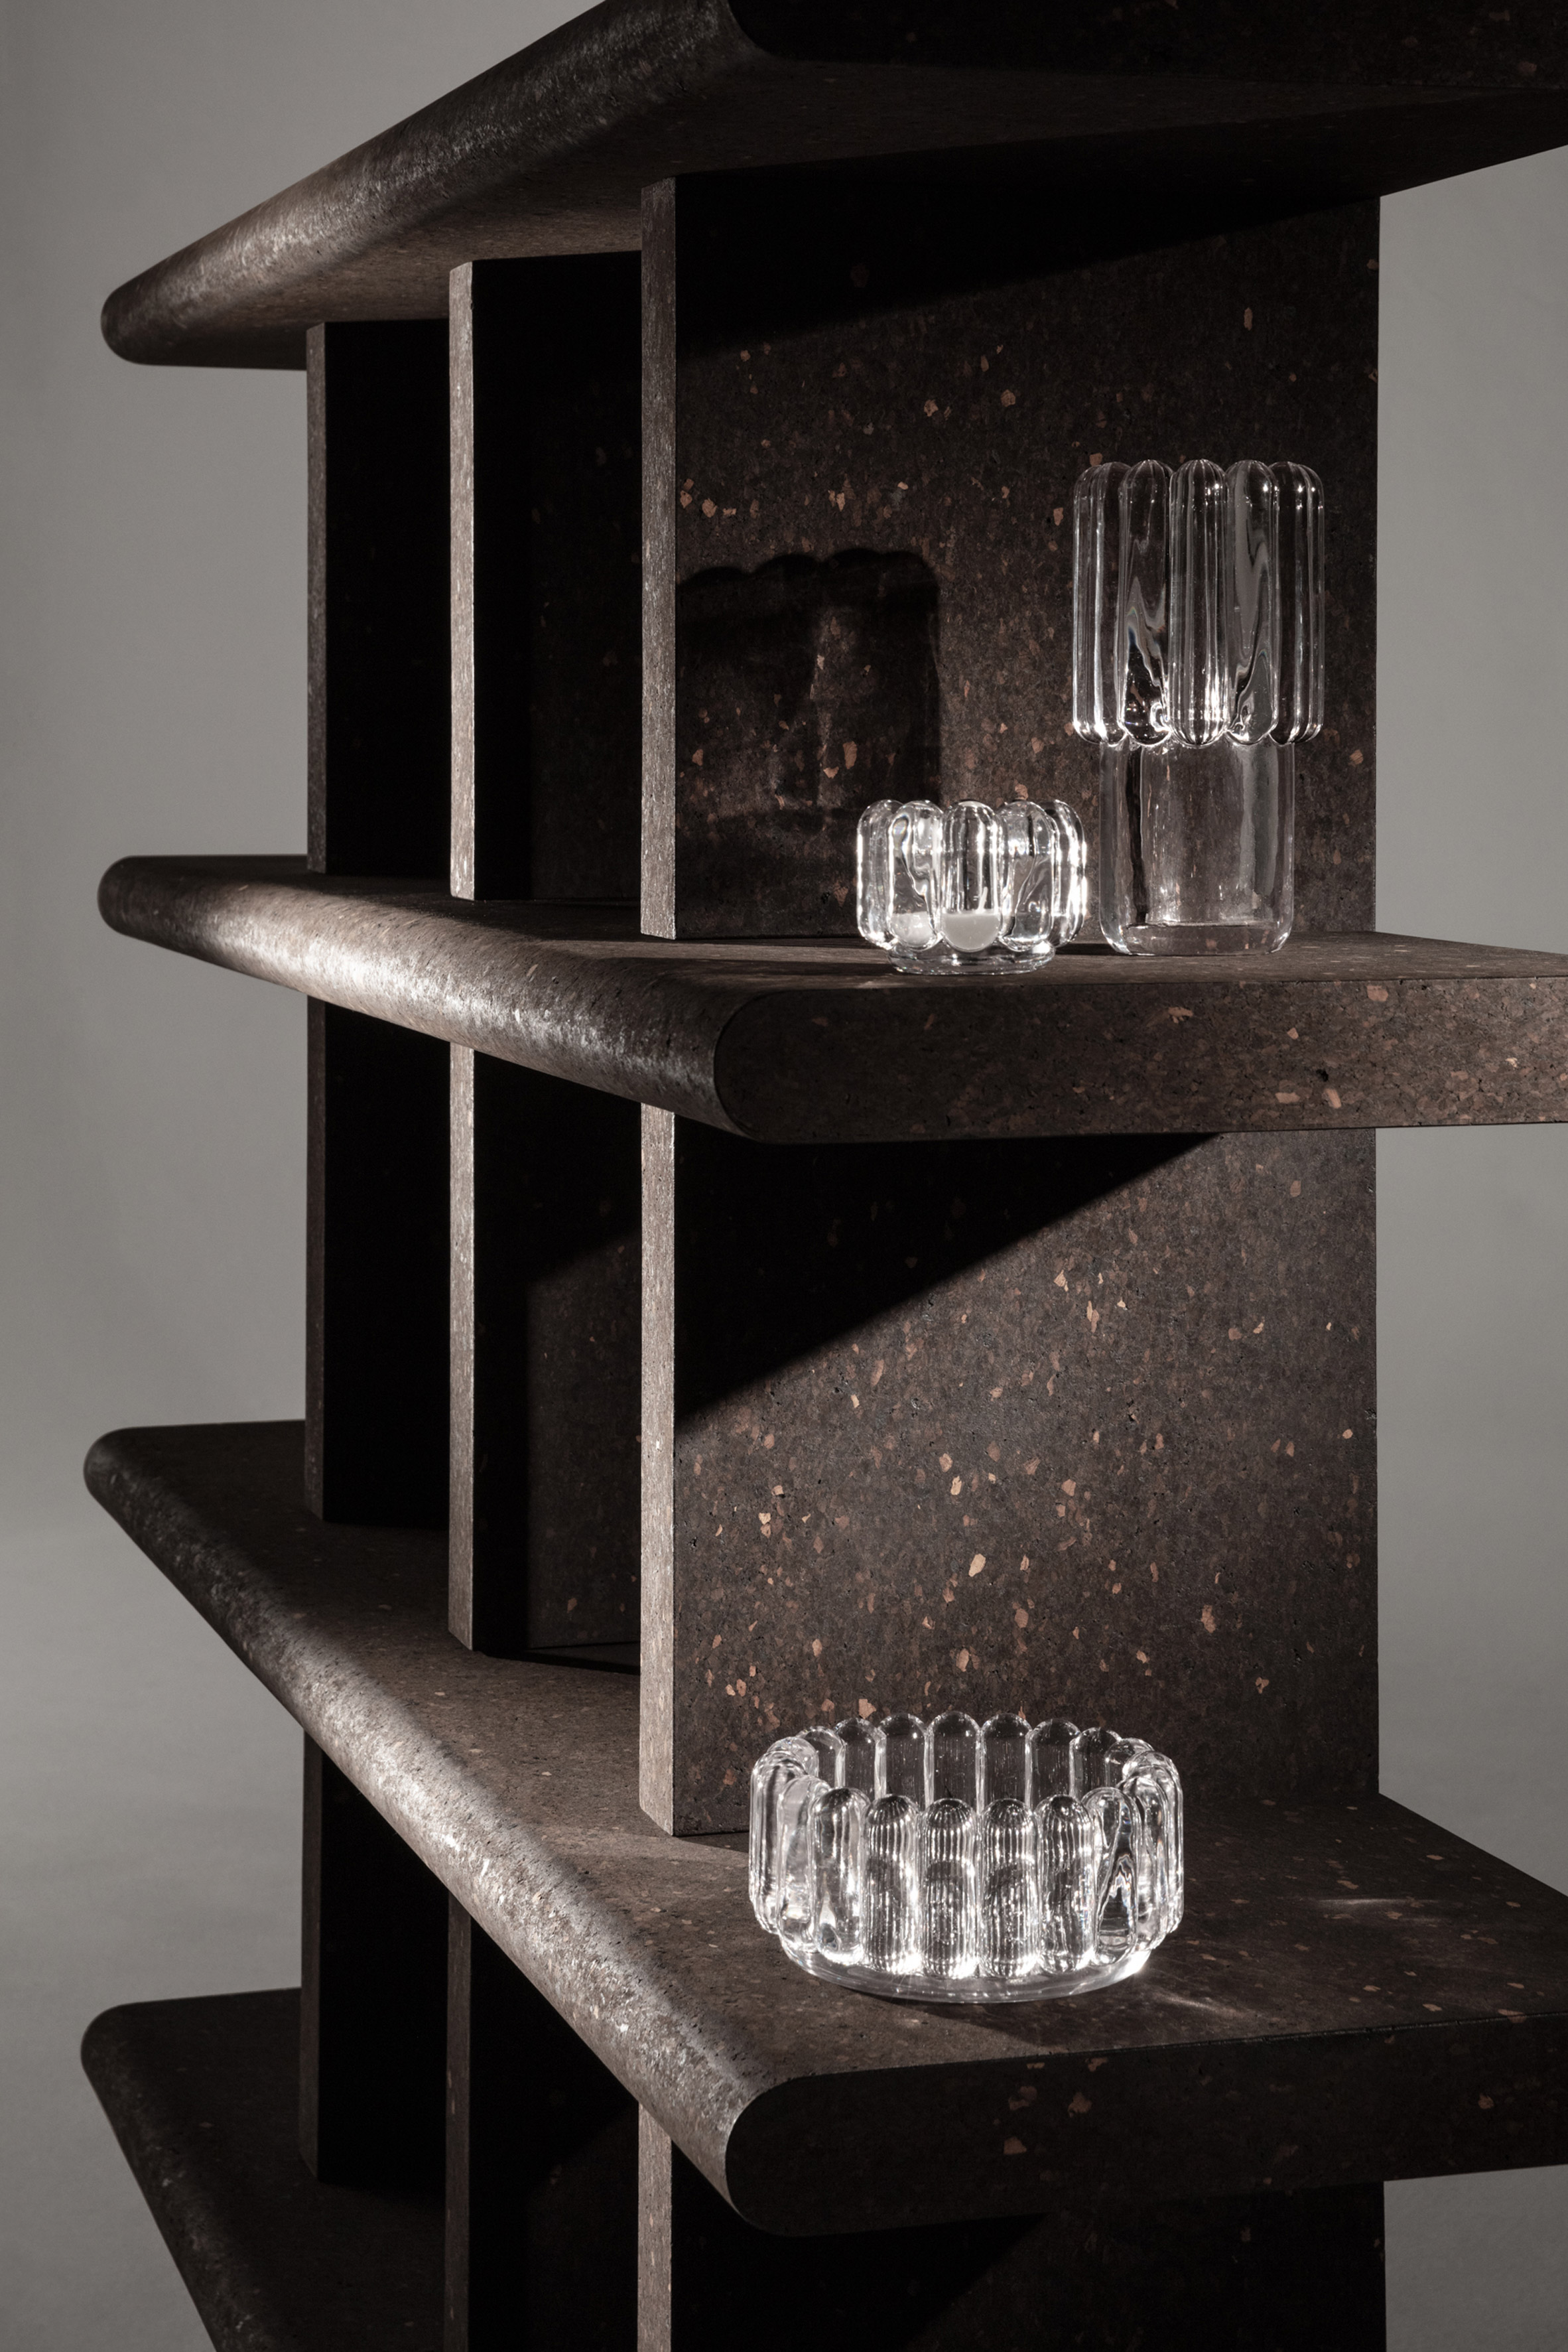 Cork shelving system by Tom Dixon